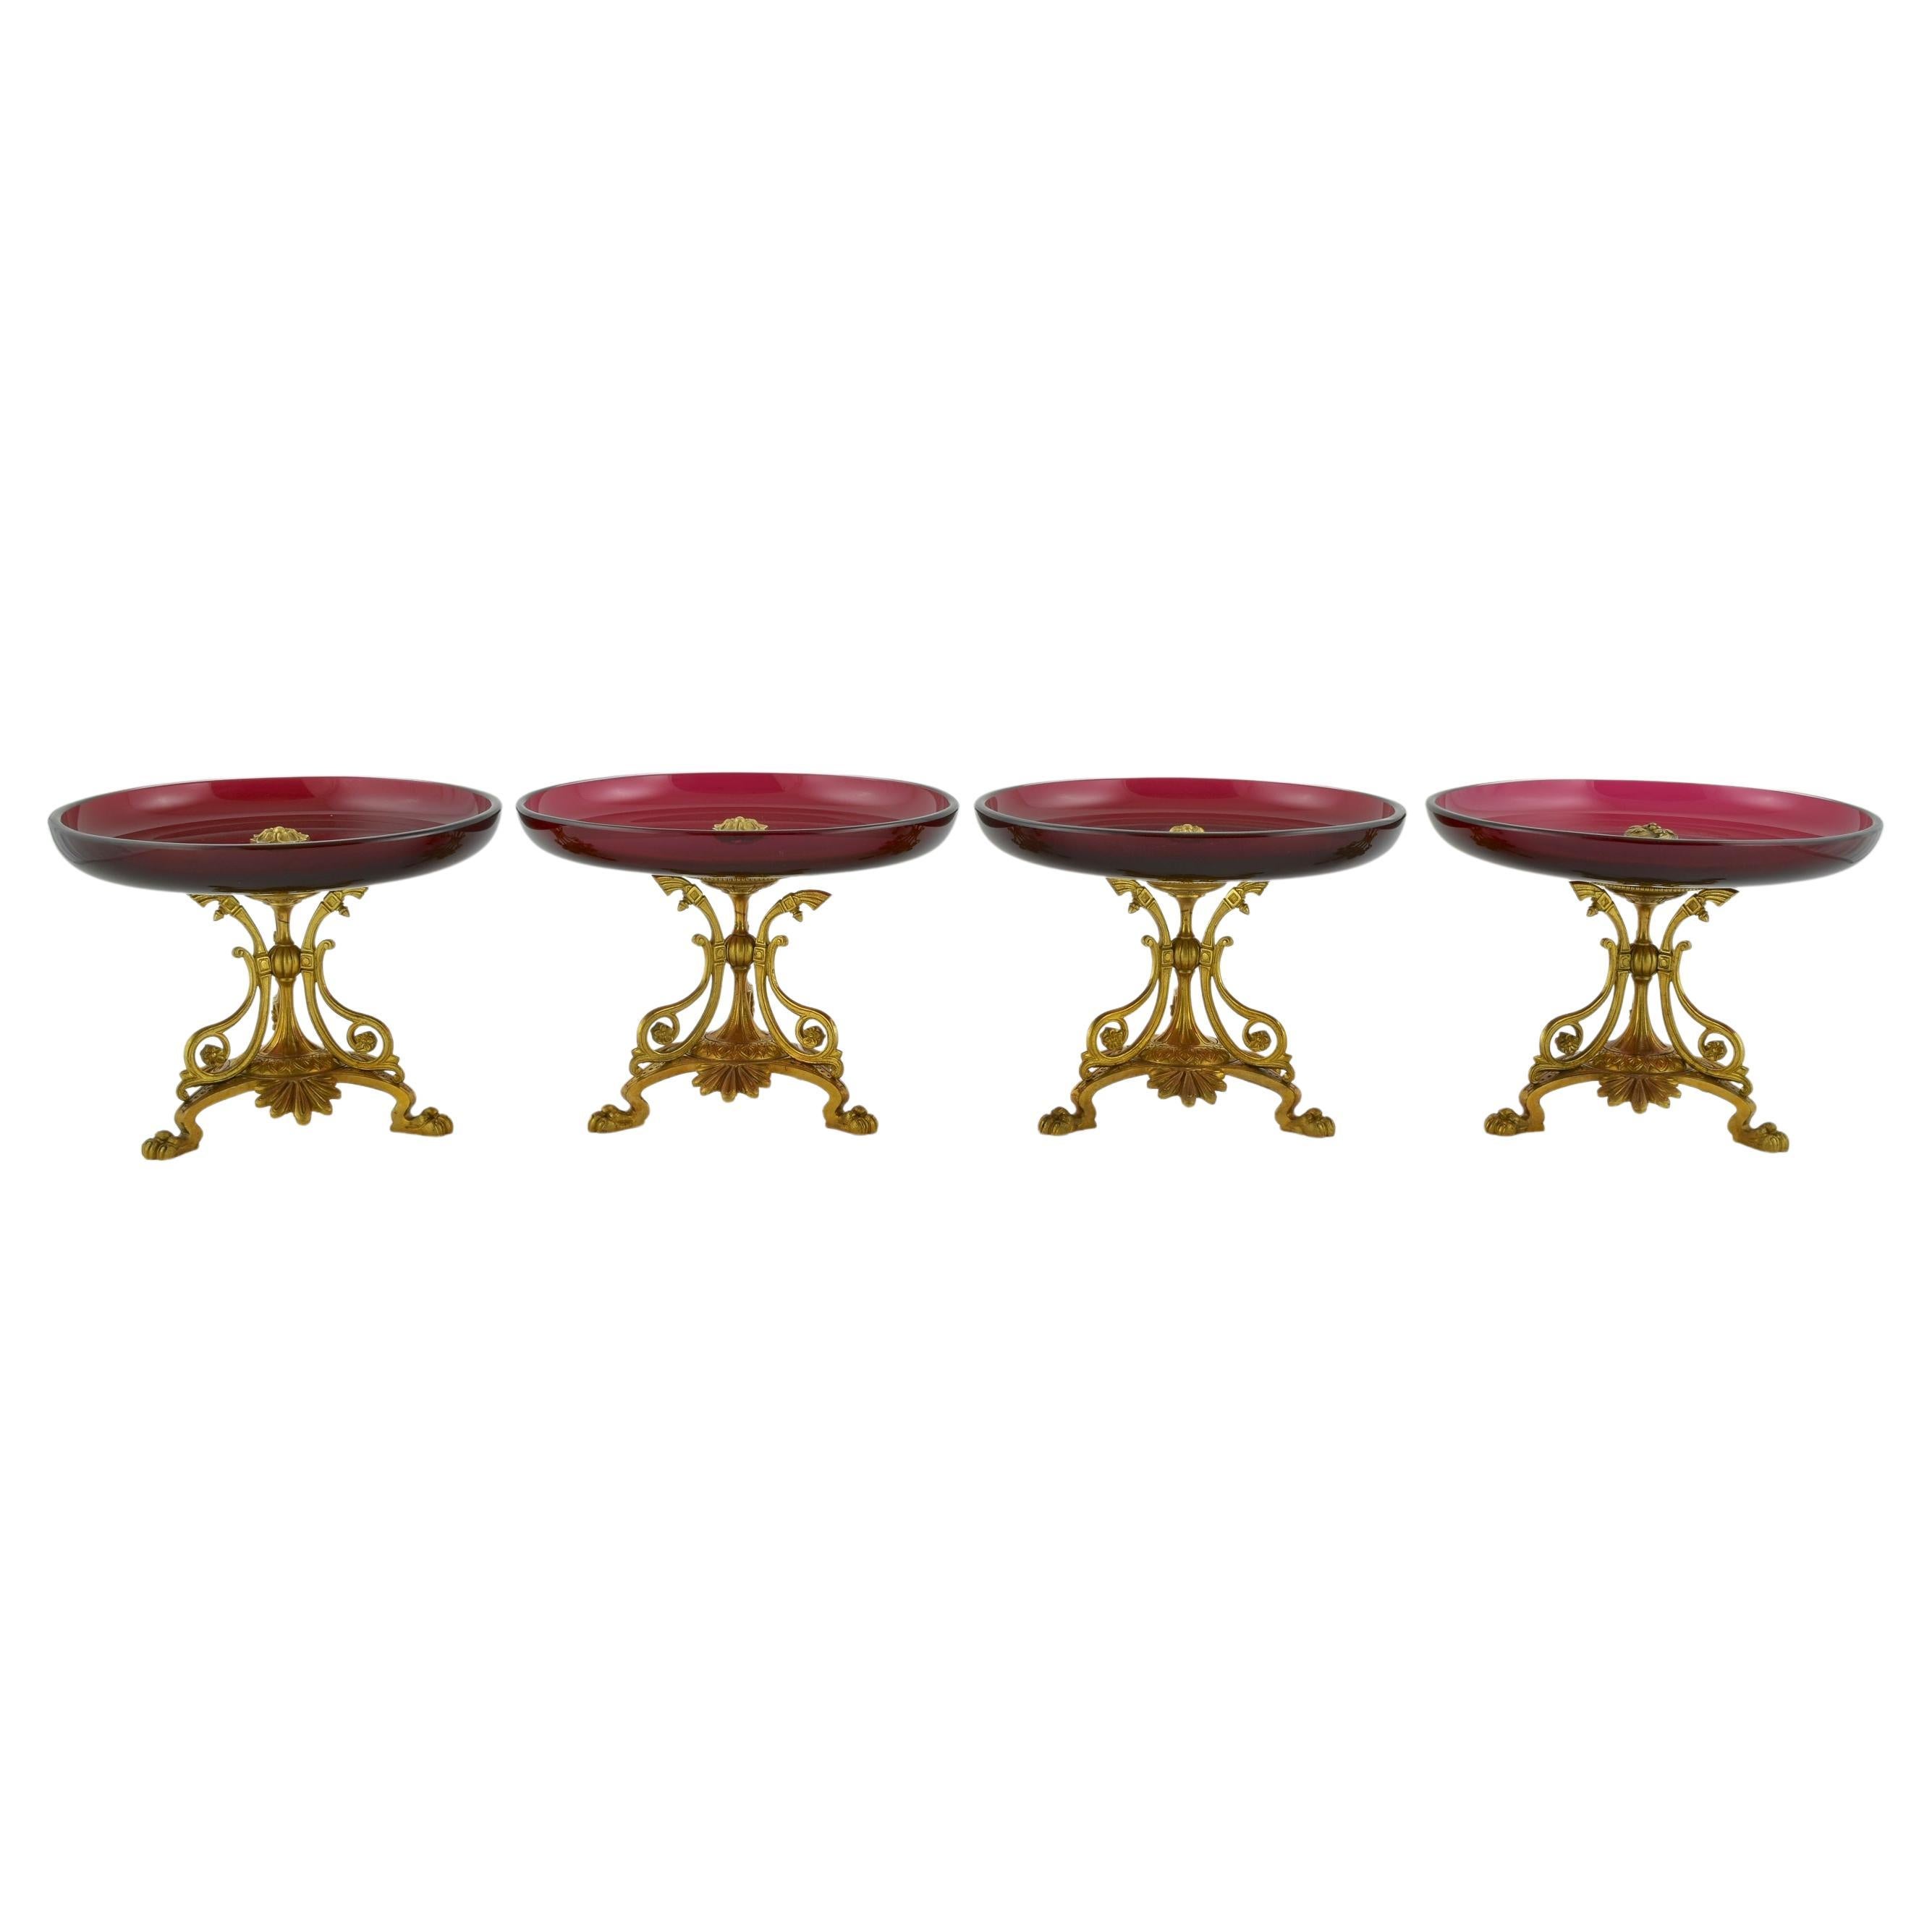 Set of 4 Late 19th Century Ormolu Ruby Glass Comport Dessert Stands